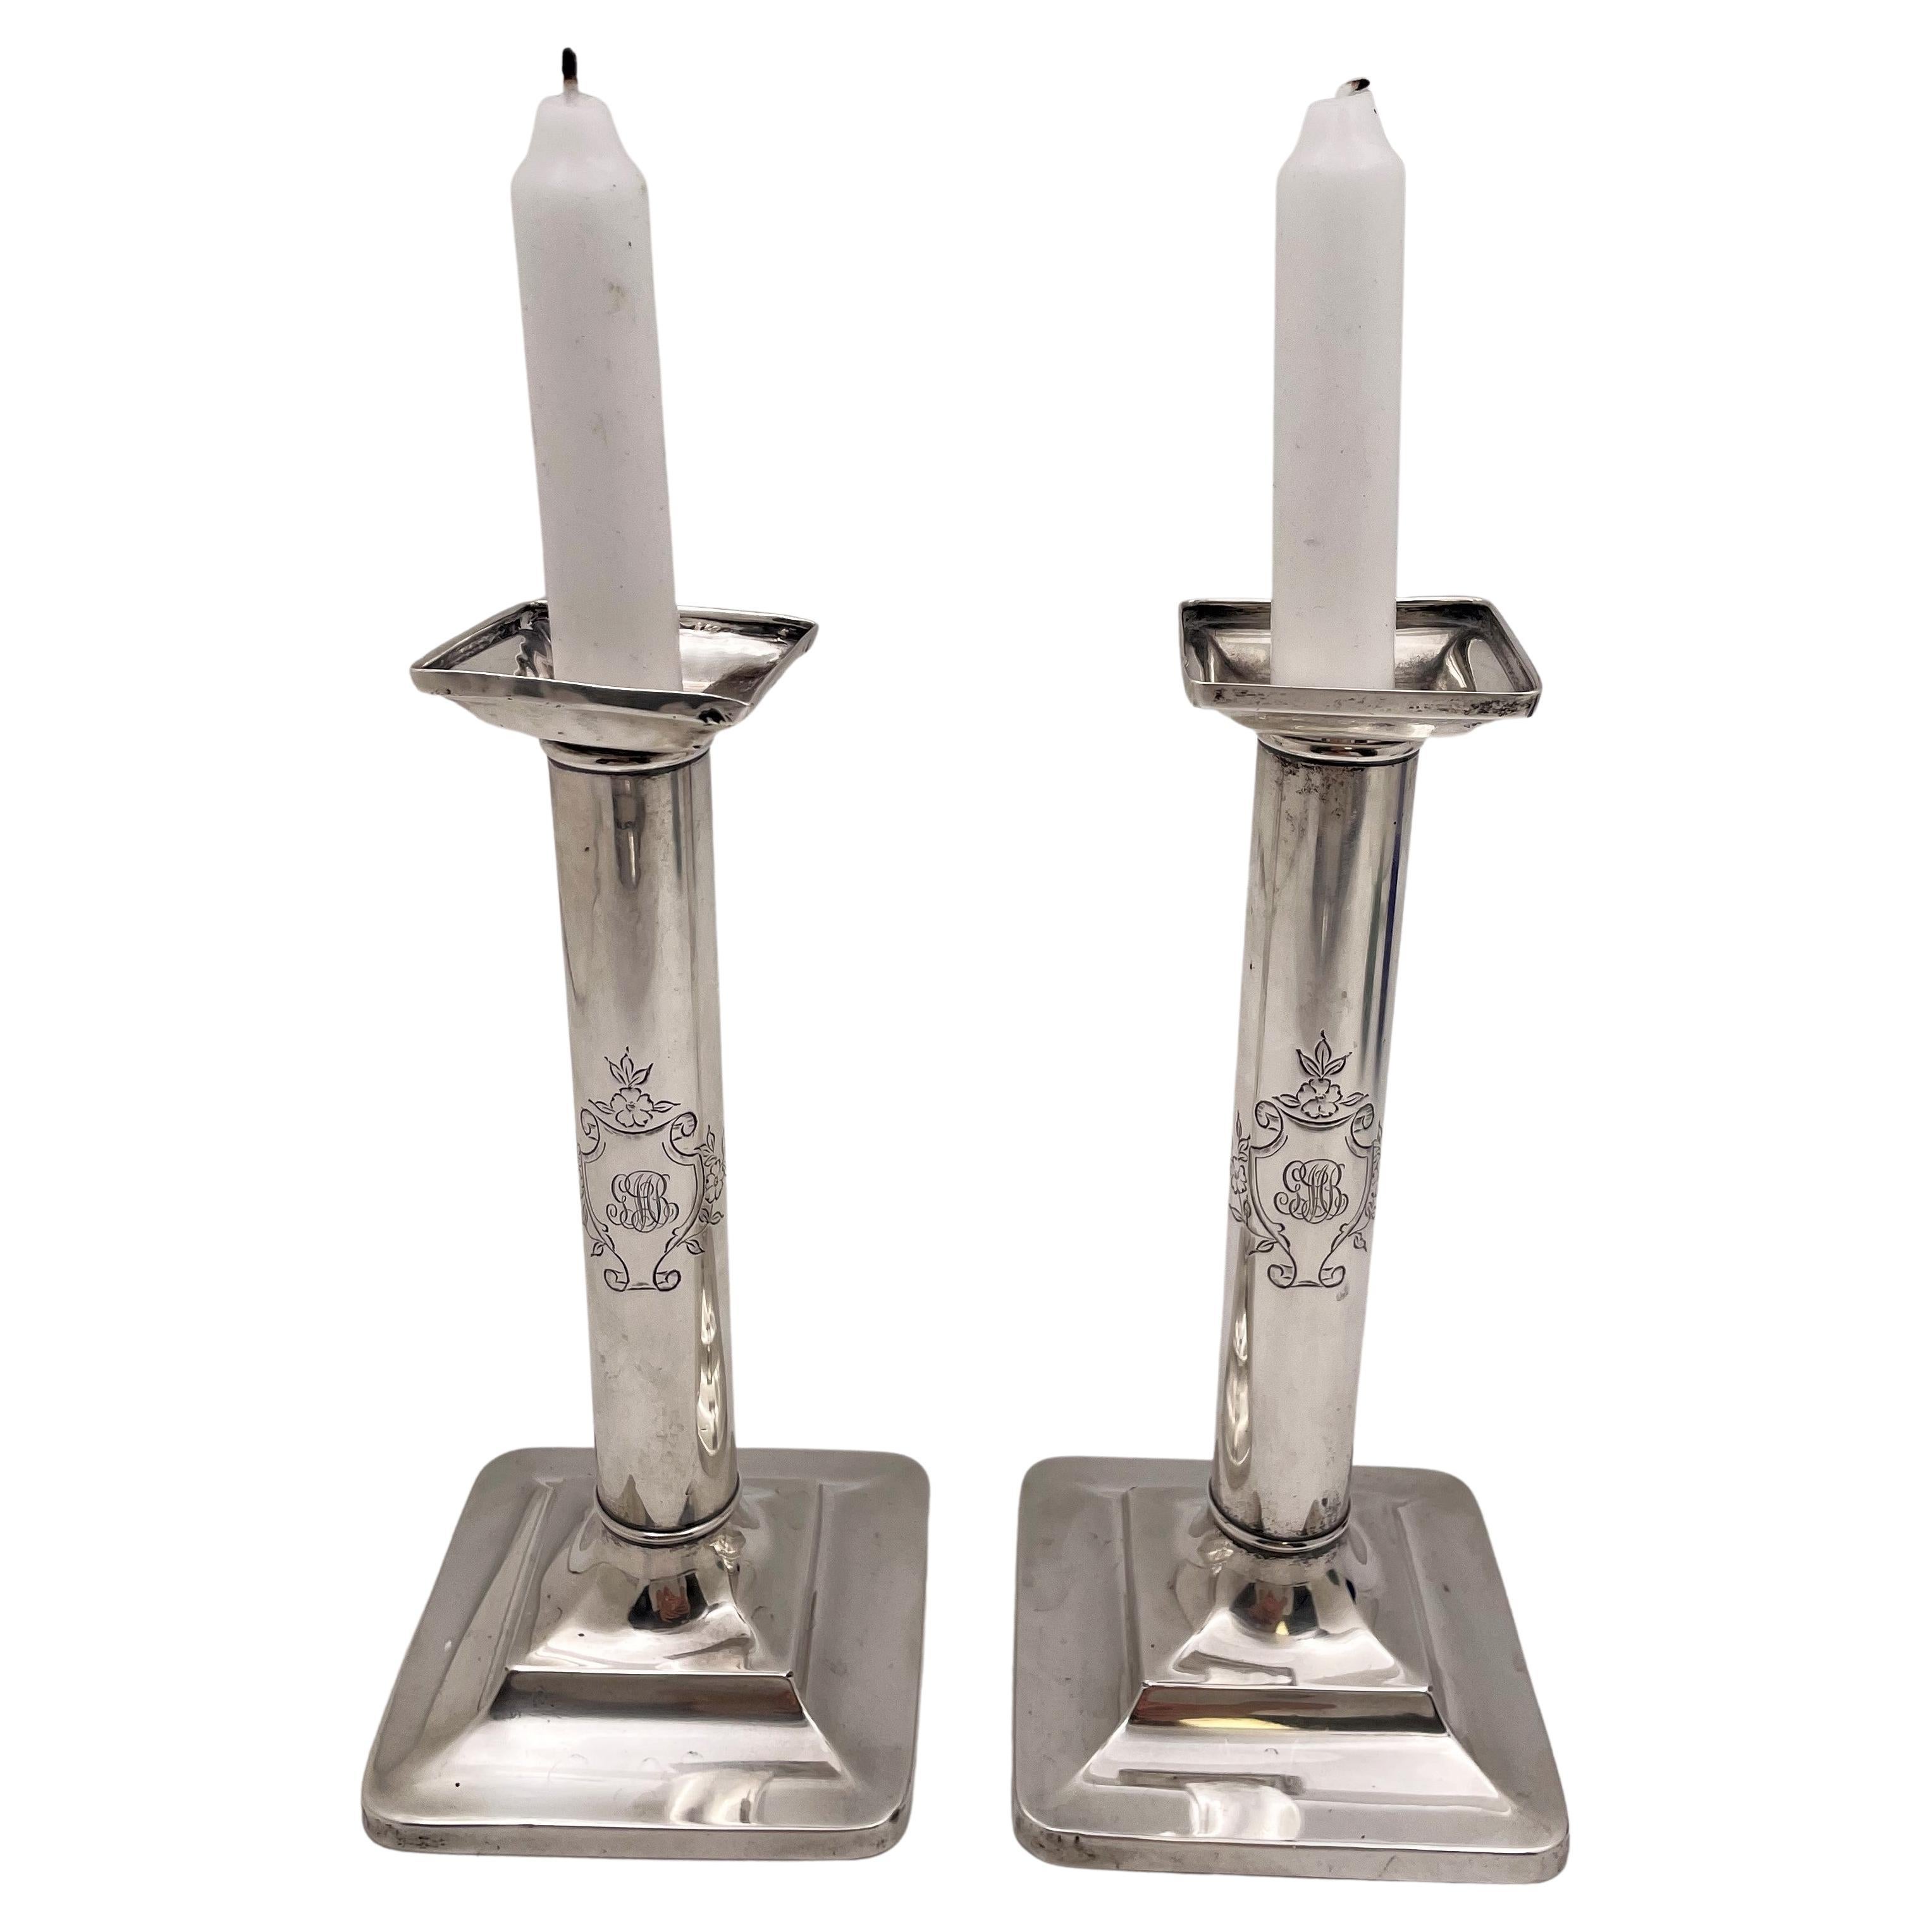 Pair of Tiffany & Co. Sterling Silver Candlesticks from 1903 For Sale